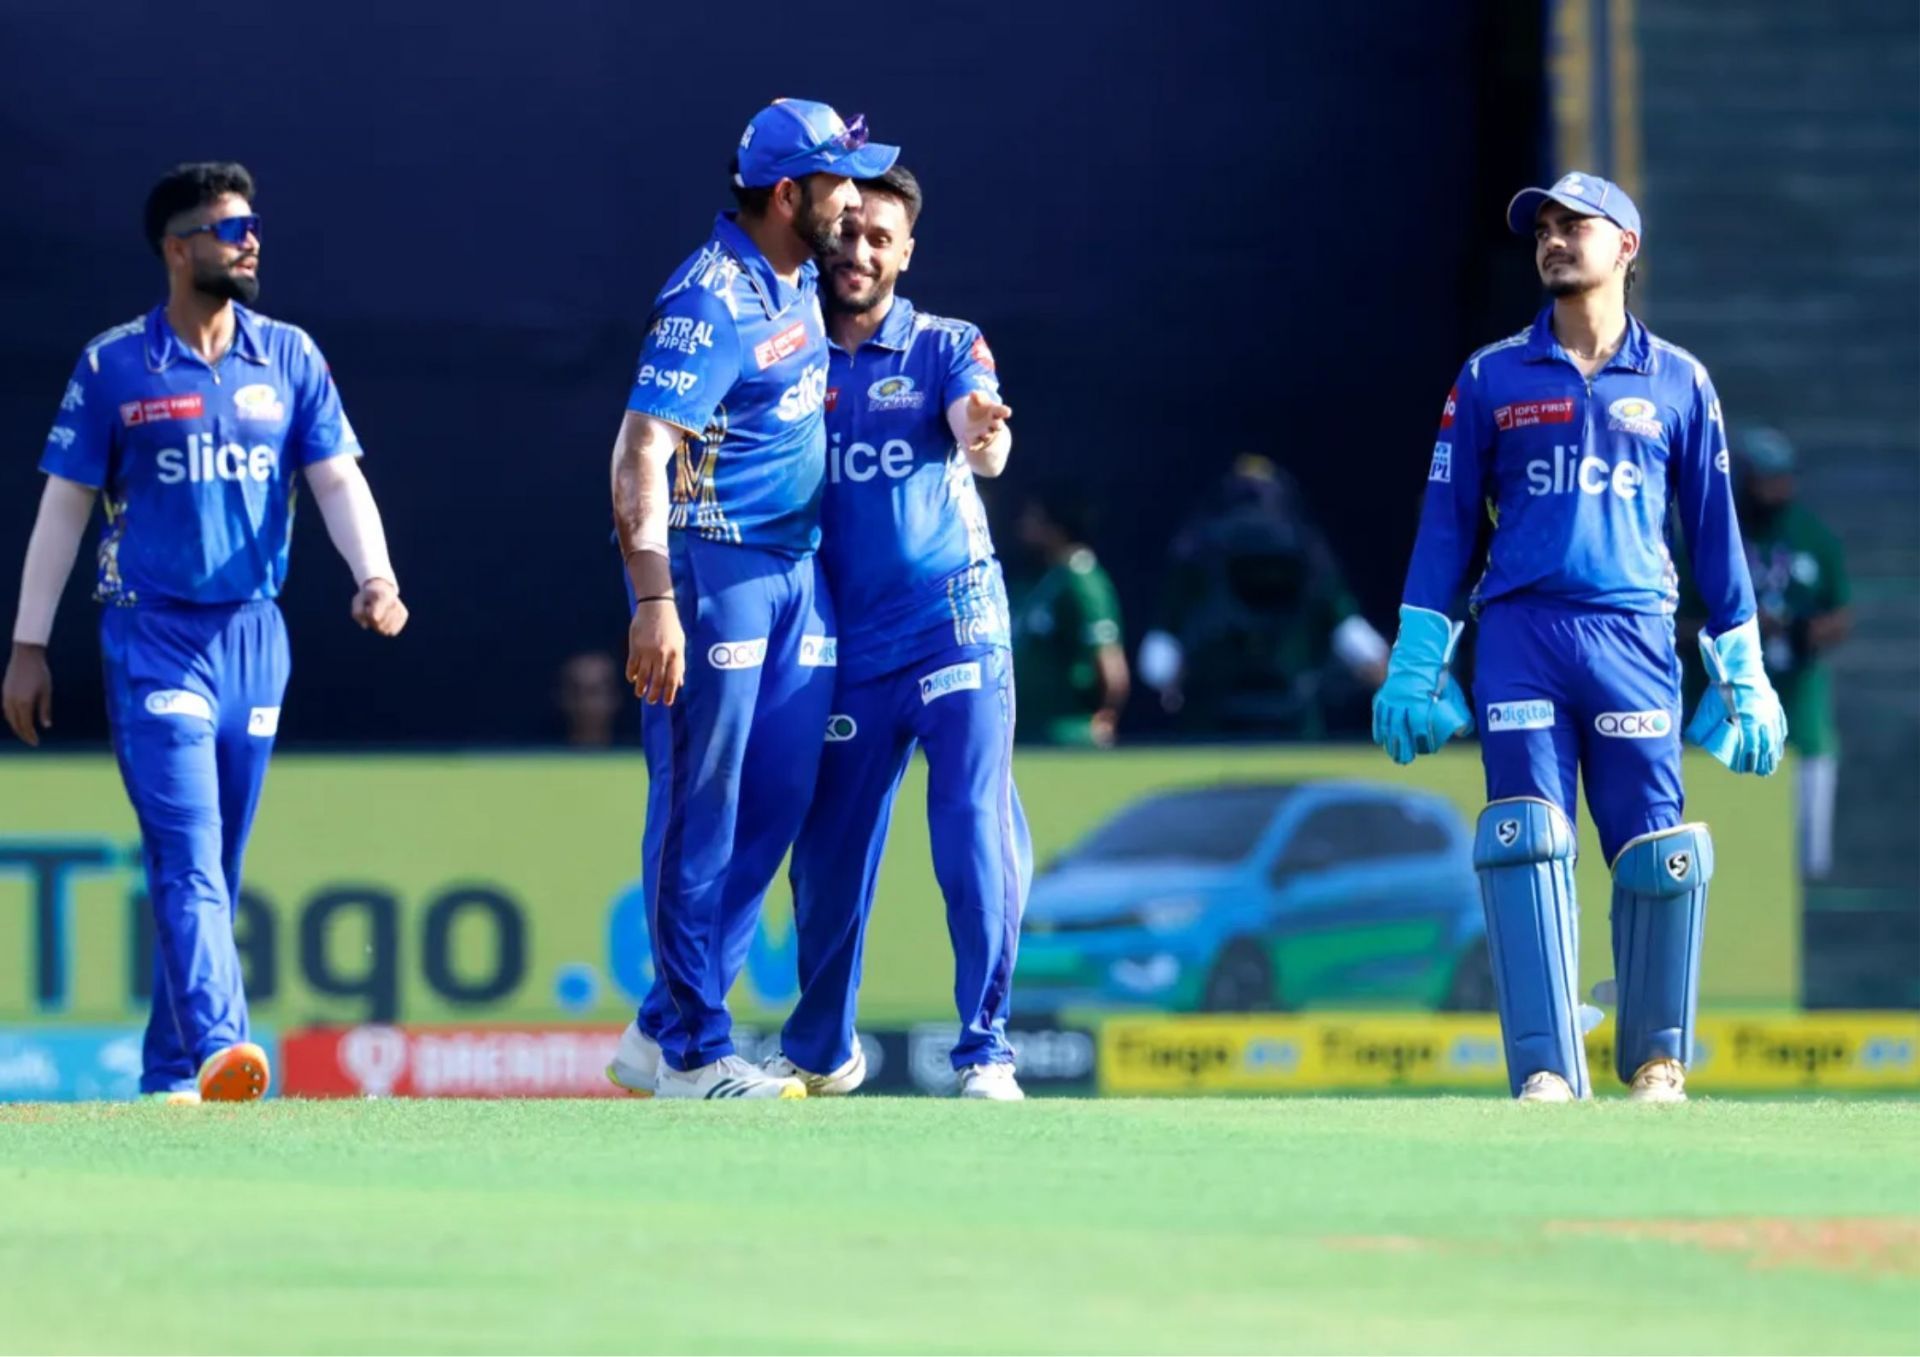 Mumbai Indians (MI) fell short in Qualifier 2 of IPL 2023 but have plenty of positives to work with for the future (Picture Credits: BCCI).